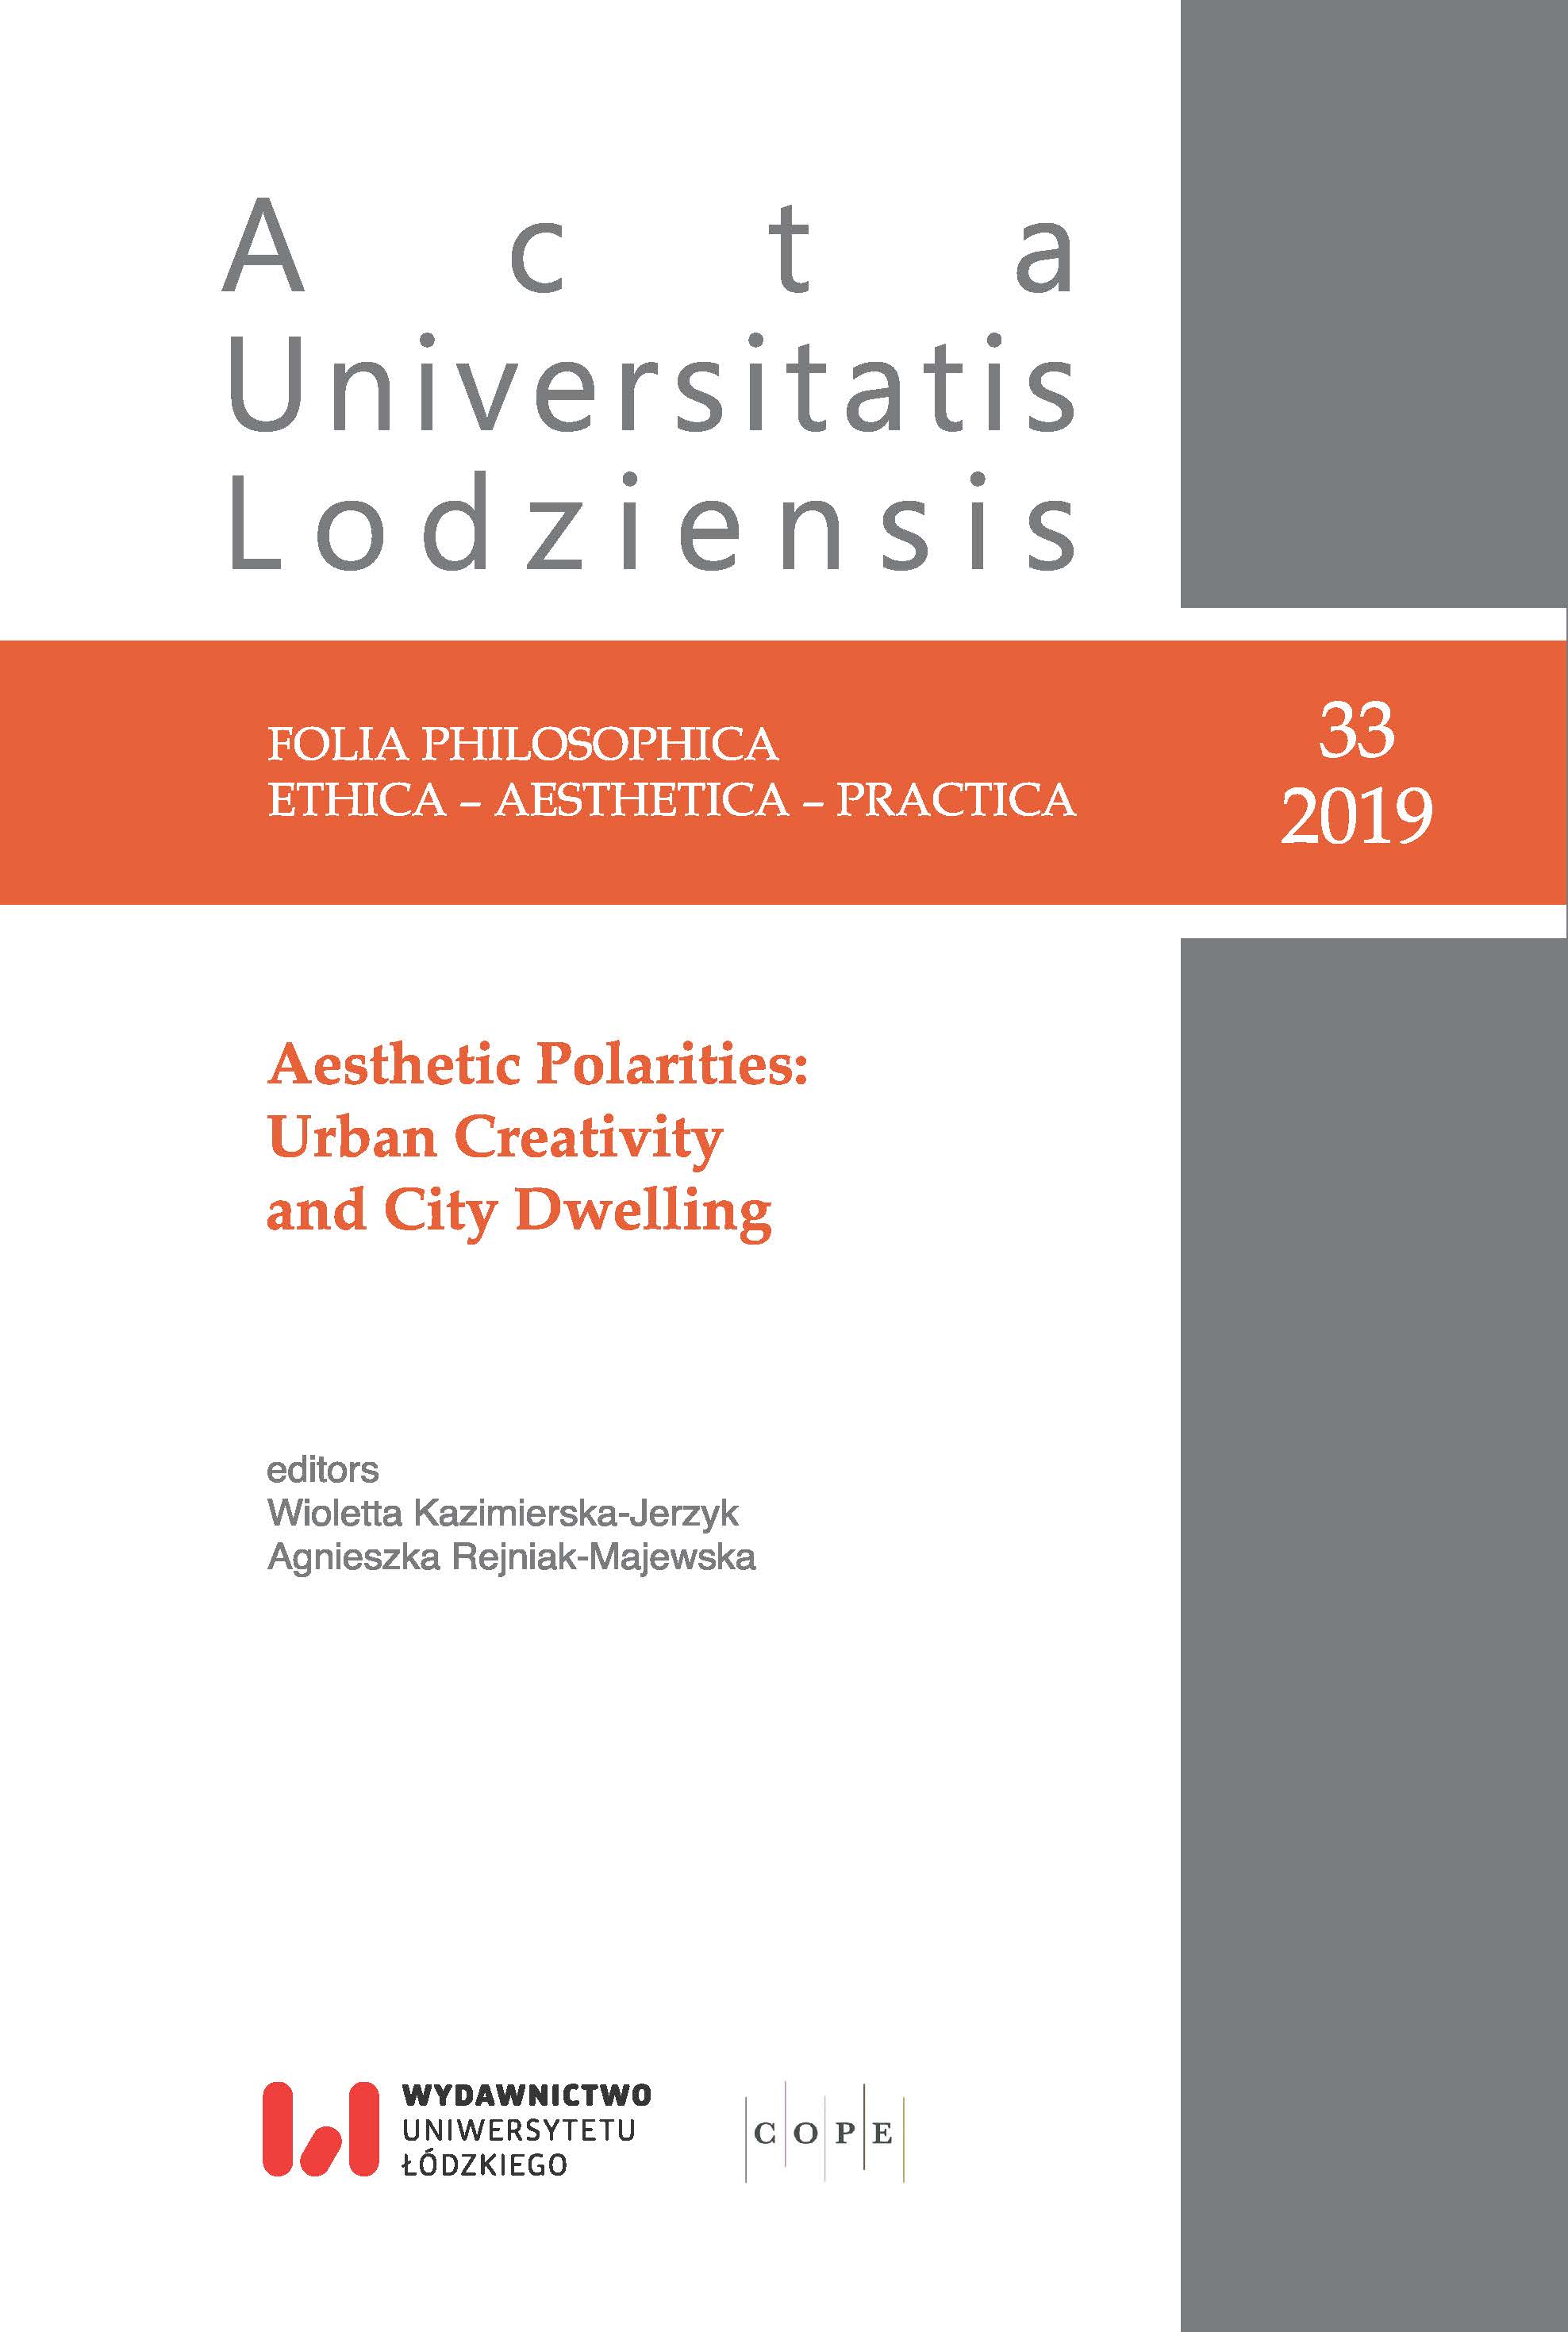 Aesthetic Polarities: Urban Creativity and City Dwelling. Introduction